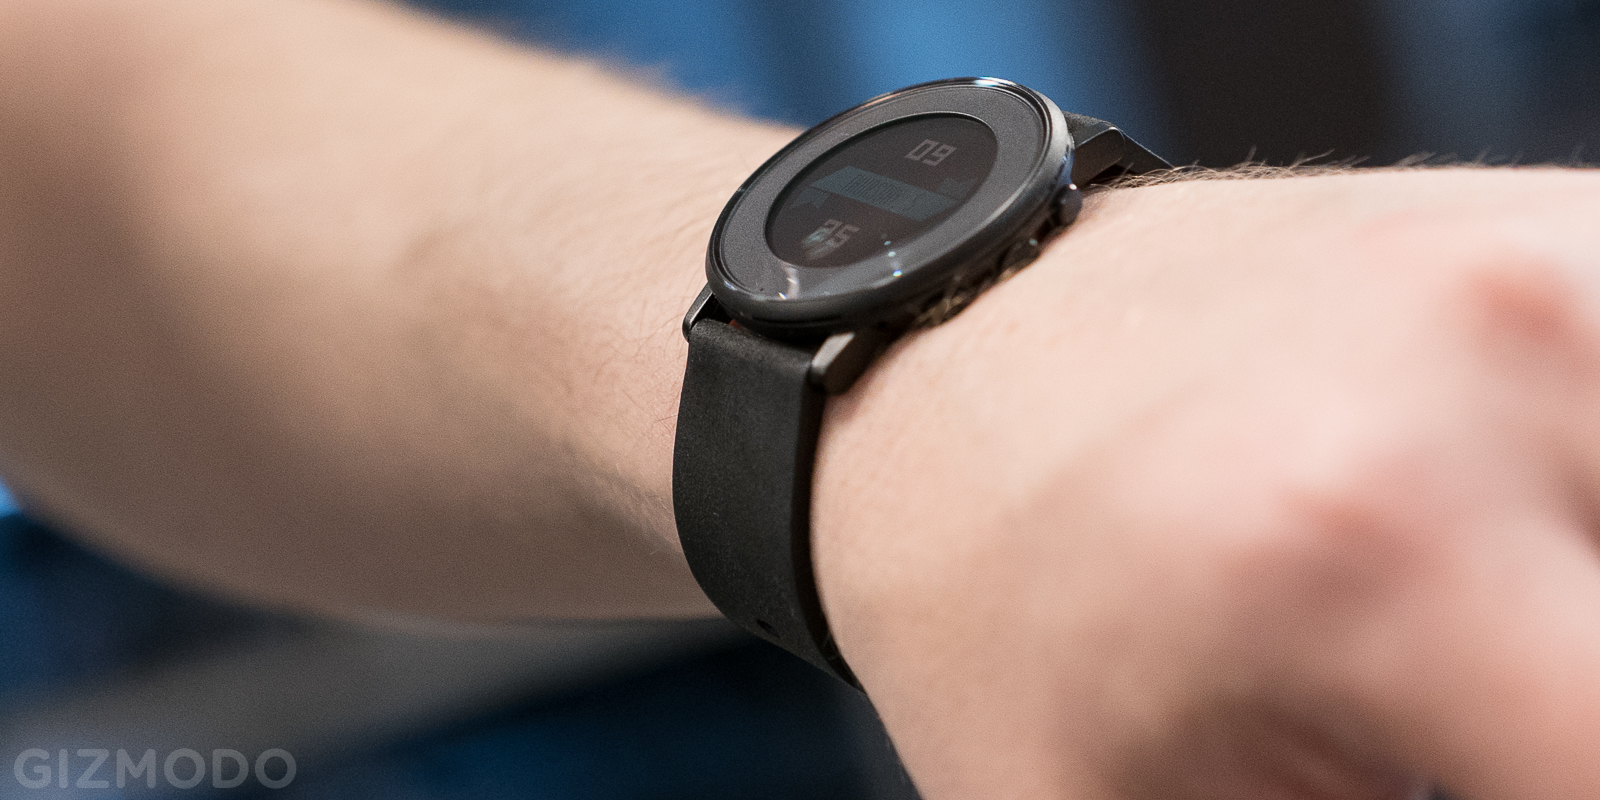 Pebble Time Round Review: Beauty In Simplicity